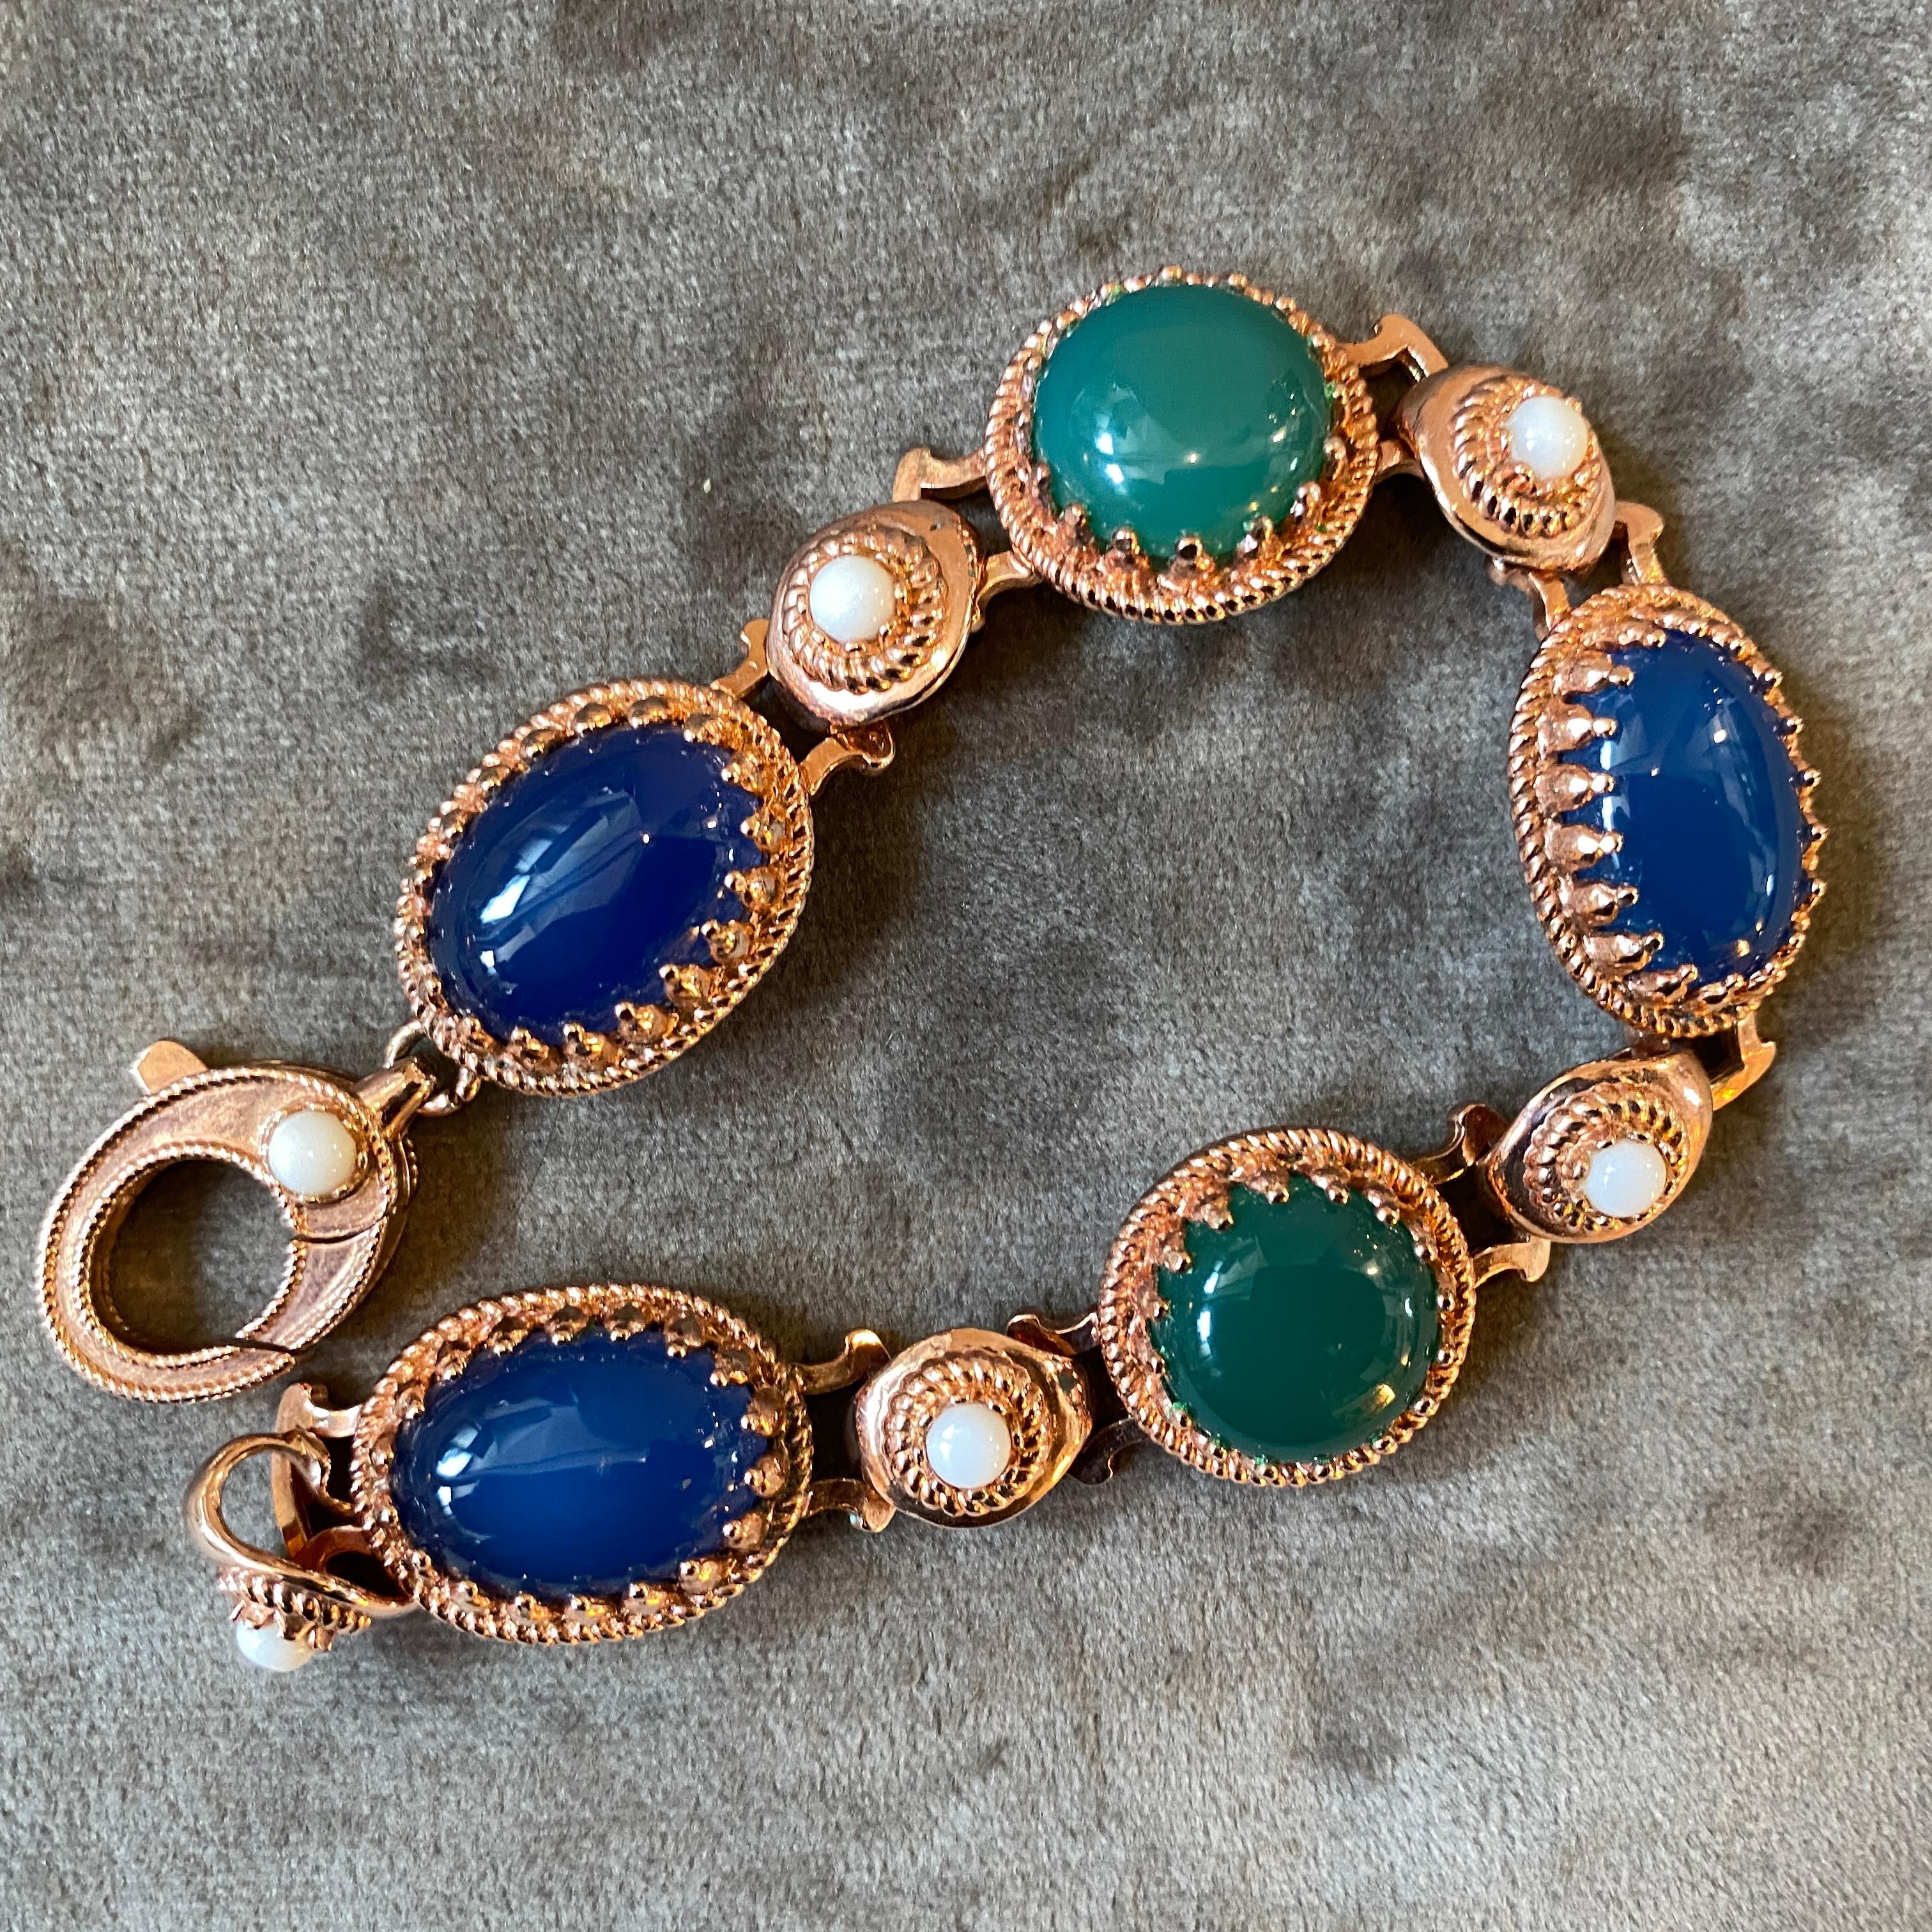 1990s Green and Blue Agate and Bronze Italian Bracelet by Anomis 1